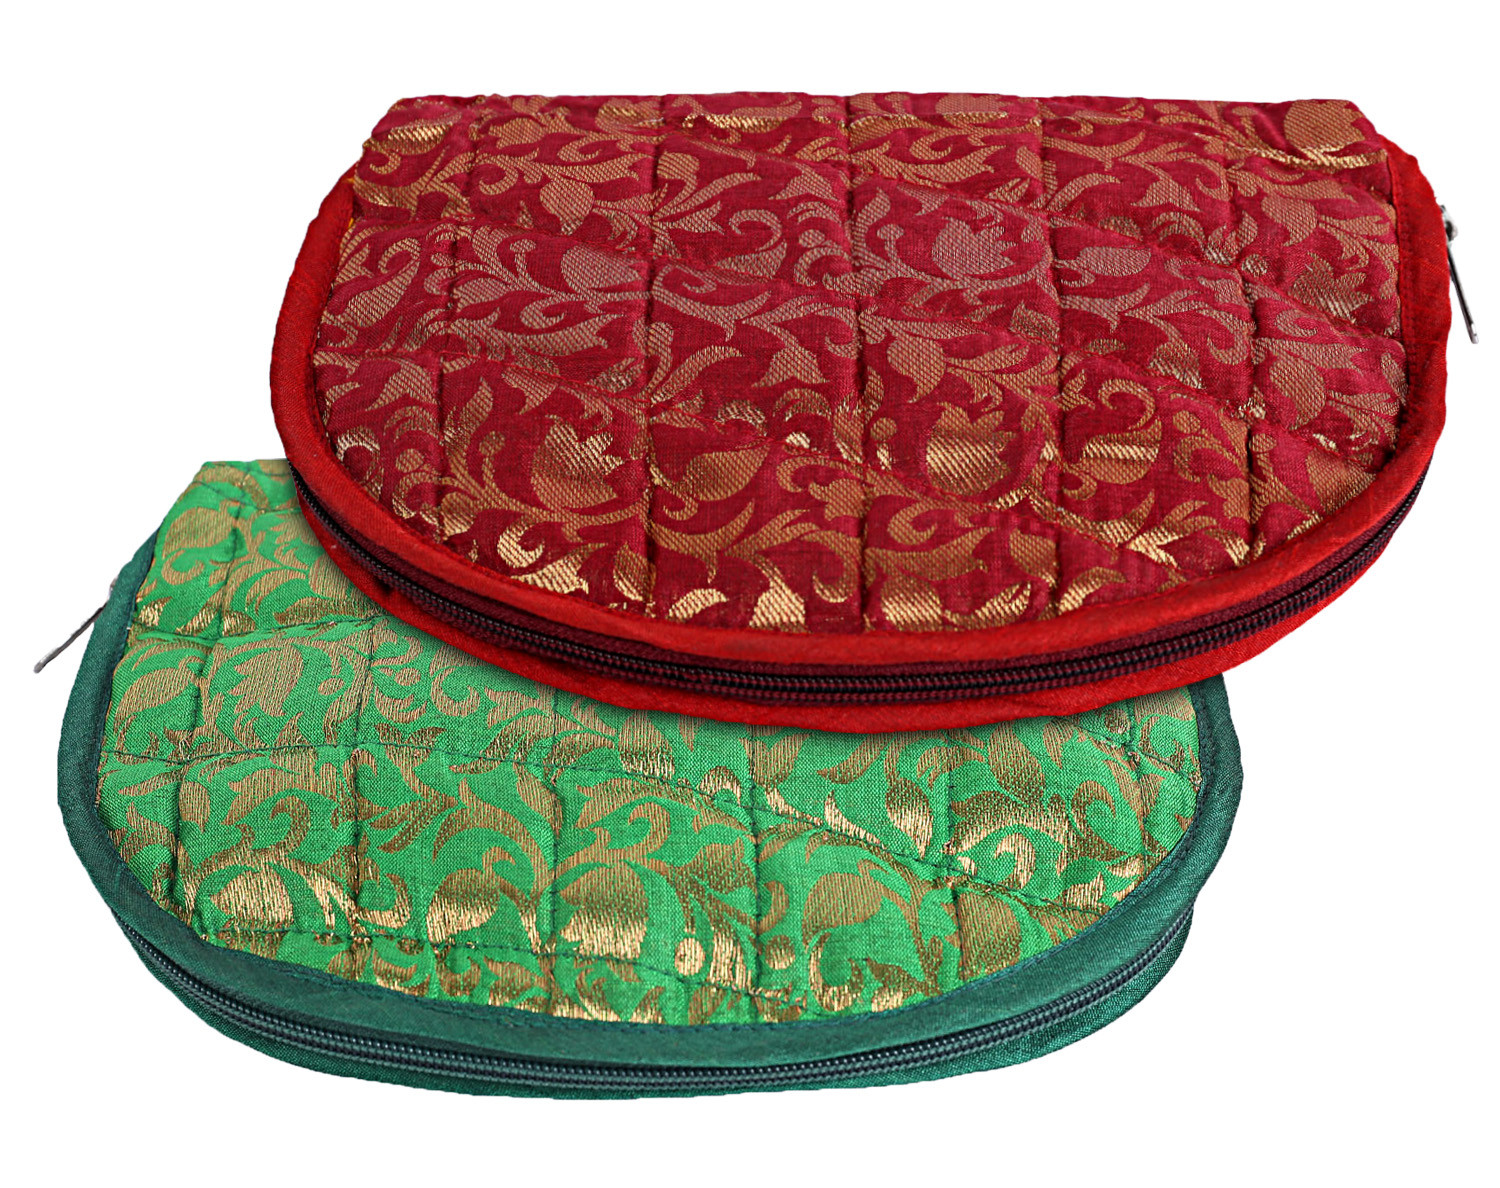 Kuber Industries Polyester Toiletry Organizer With 4 Transparent Poches & 1 Extra Compartment,Zipper Closure,Pack of 2 (Red & Green)